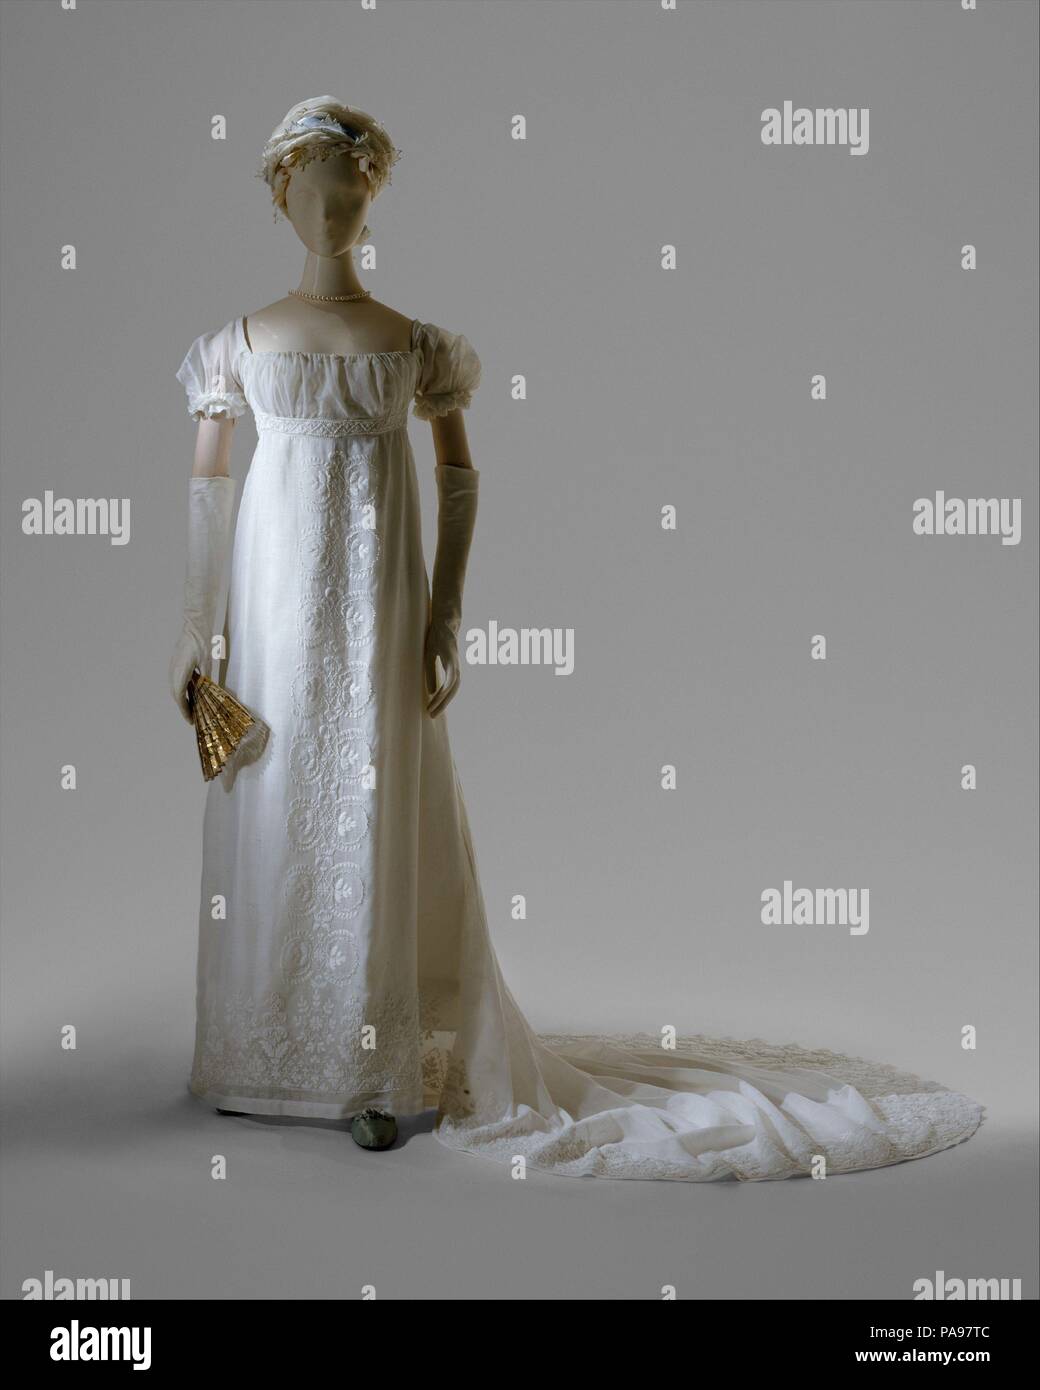 Evening dress. Culture: French. Date: 1804-5.  On December 24, 1803, Jerome Bonaparte (1784--1860), brother of Napoleon, wed Elizabeth Patterson (1785--1879) of Baltimore.  The beautiful and fashionable young American was married in a dress of muslin and lace that, according to a contemporary, 'would fit easily into a gentleman's pocket.'  This description evokes the sheer, narrow dresses that caused a sensation at the beginning of the nineteenth century, more because of their contrast with the elaborate hooped costumes of previous decades than for any real immodesty.    Although originally th Stock Photo